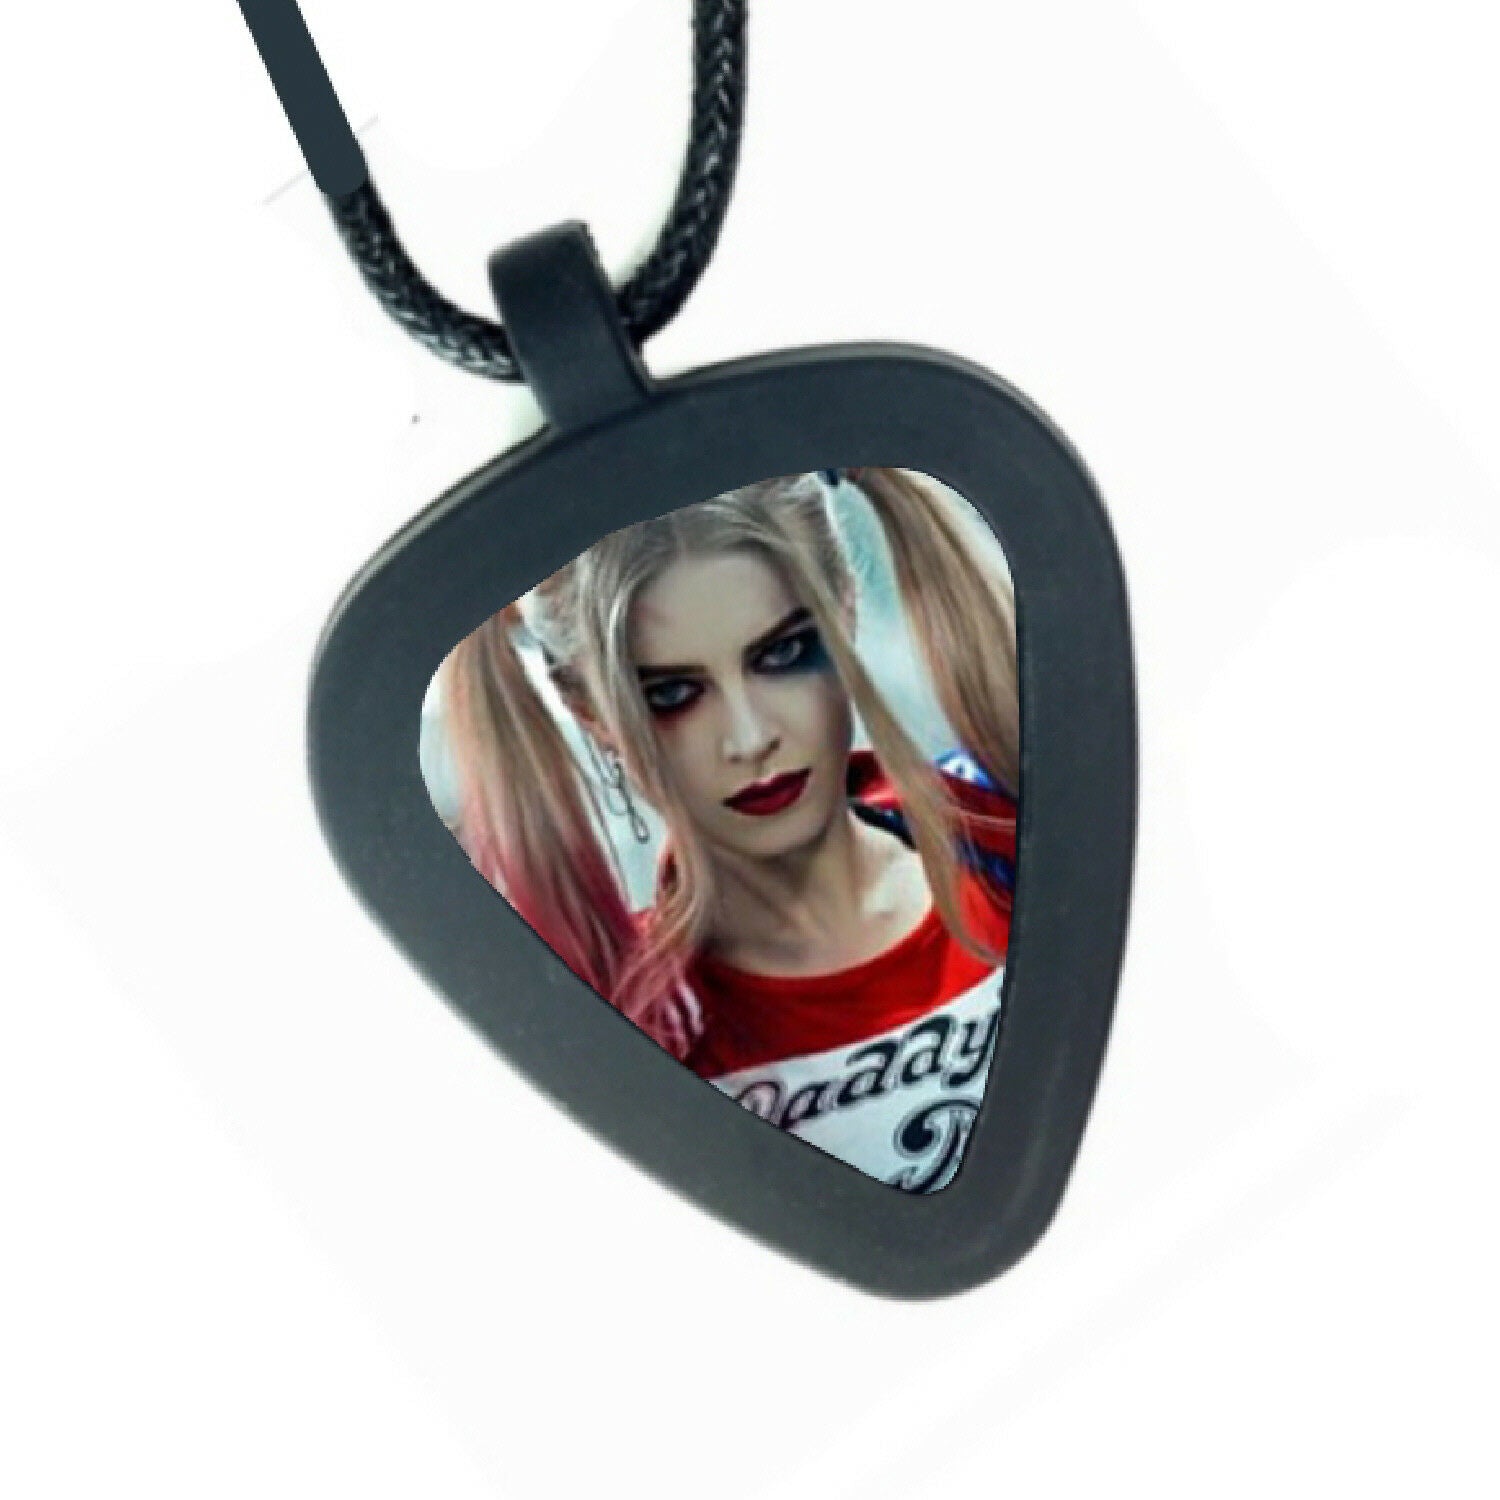 Harley Quinn Choker Necklace - The Suicide Squad - Spirithalloween.com